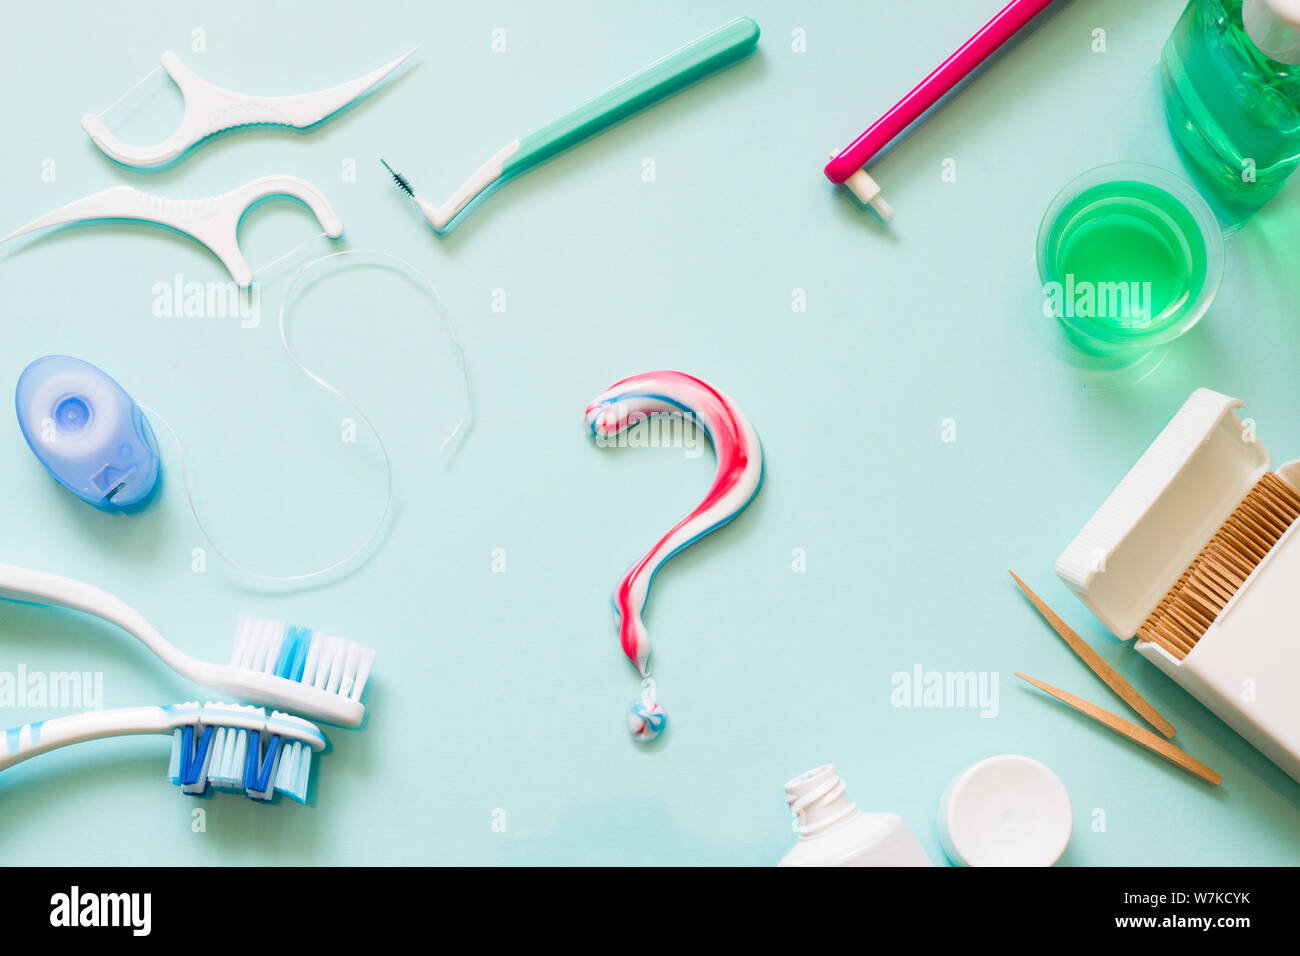 Teeth care frame concept with manual toothbrushes and oral hygiene products Stock Photo